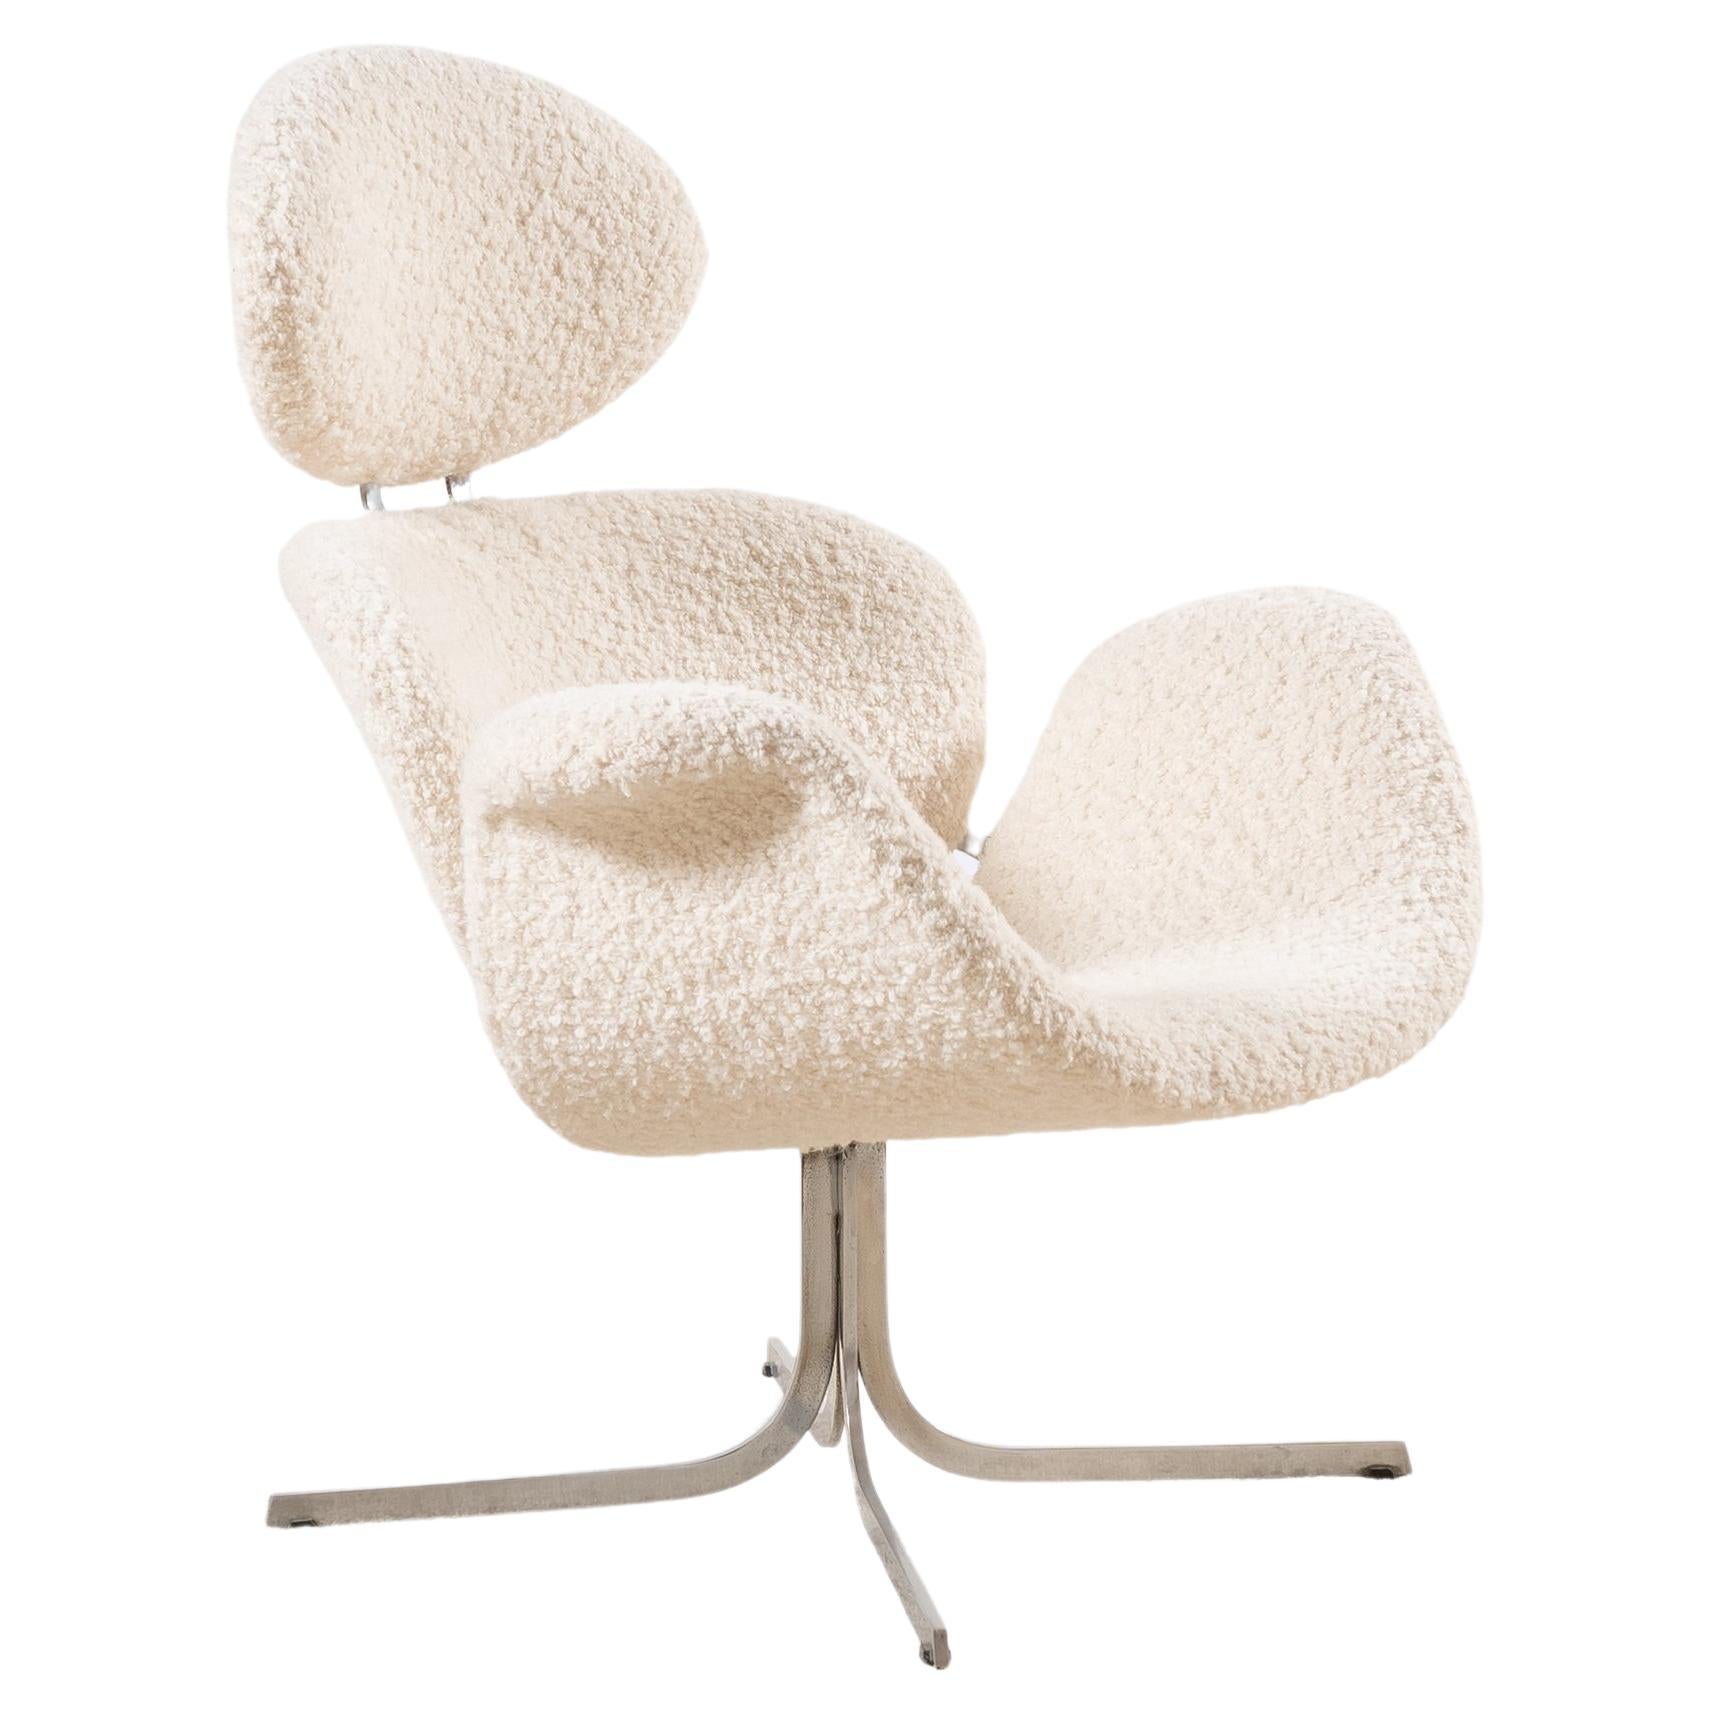 Pierre Paulin, Rare 1st Edition of "Big Tulip" F551 Armchair for Artifort, 1959 For Sale